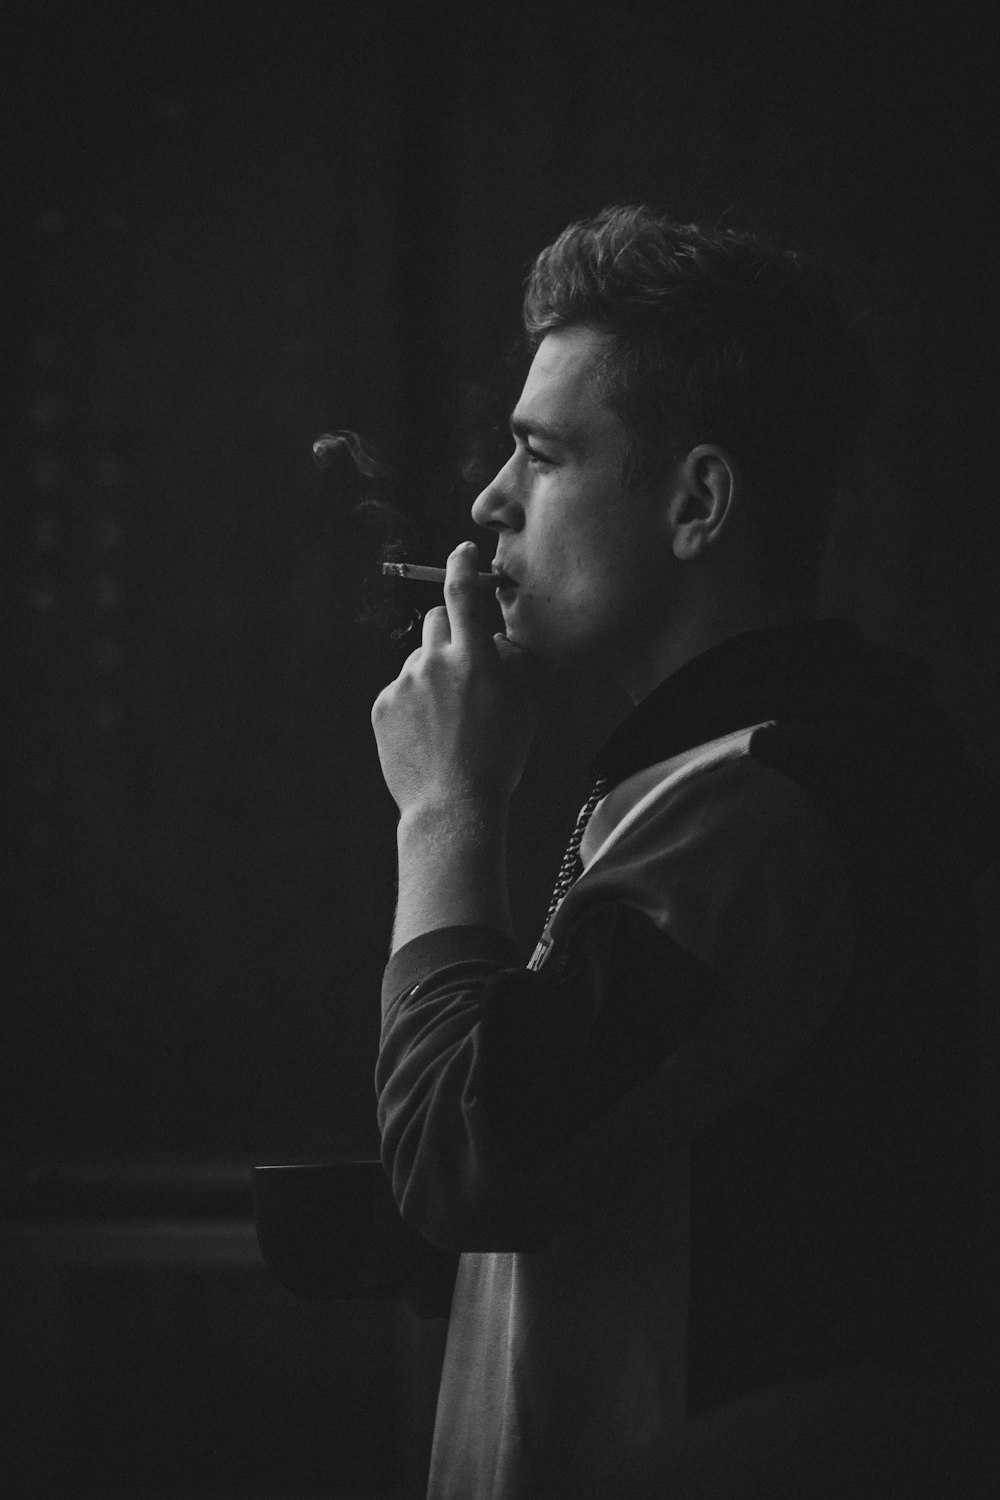 photography of man using cigarette